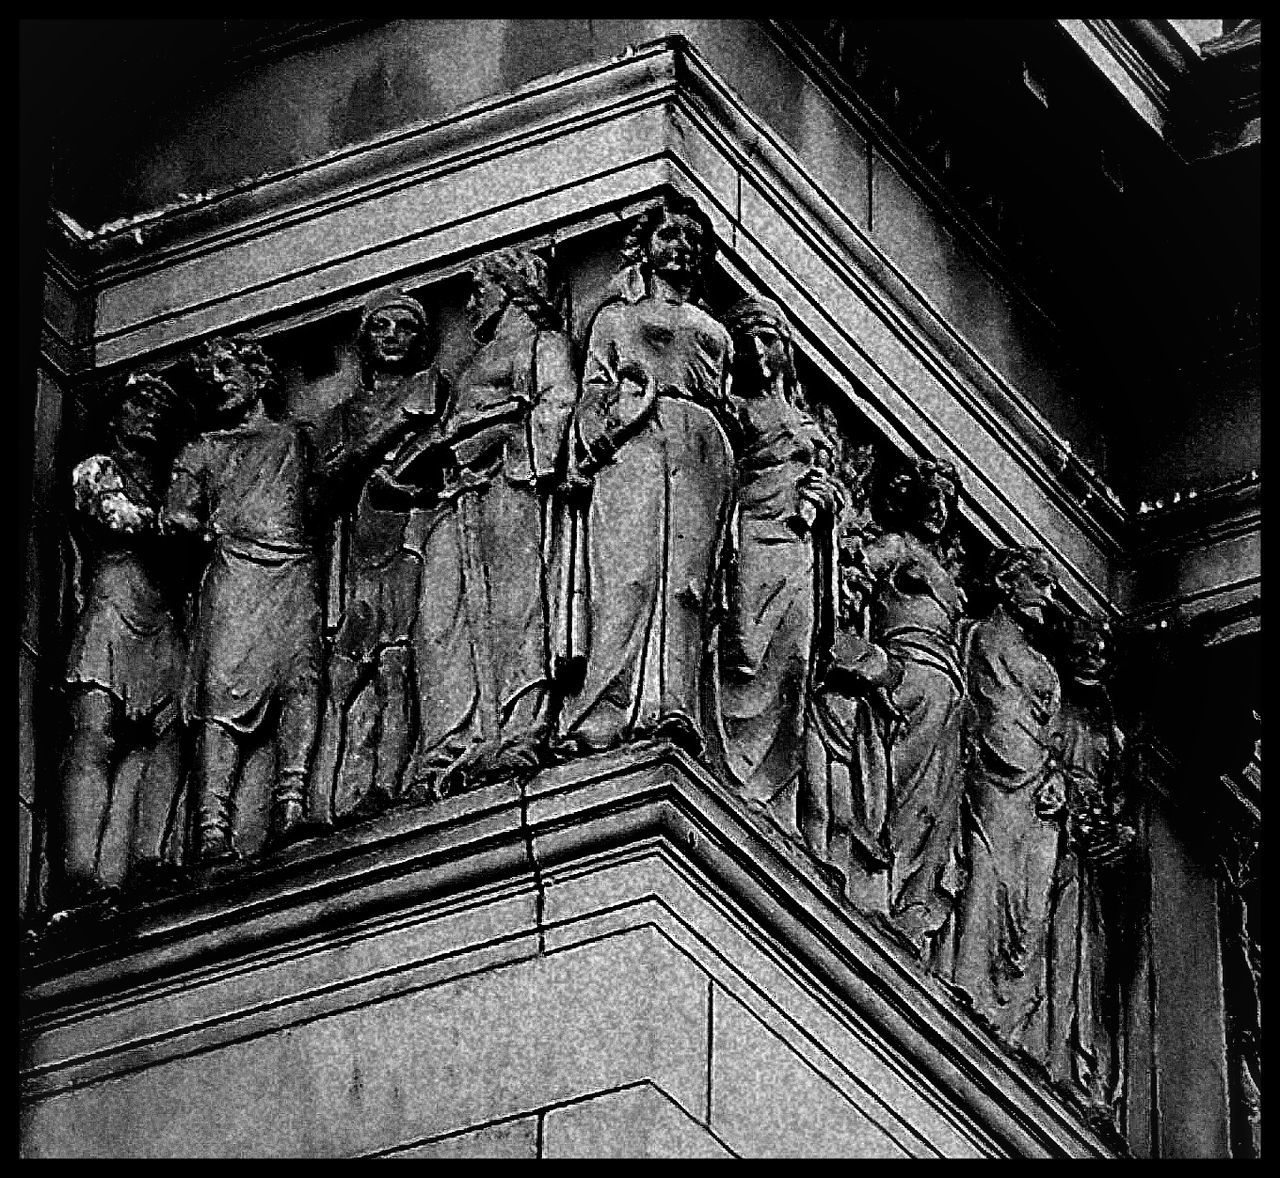 representation, human representation, architecture, art and craft, low angle view, creativity, no people, male likeness, the past, built structure, history, craft, sculpture, building exterior, carving - craft product, building, female likeness, spirituality, statue, carving, ceiling, ornate, bas relief